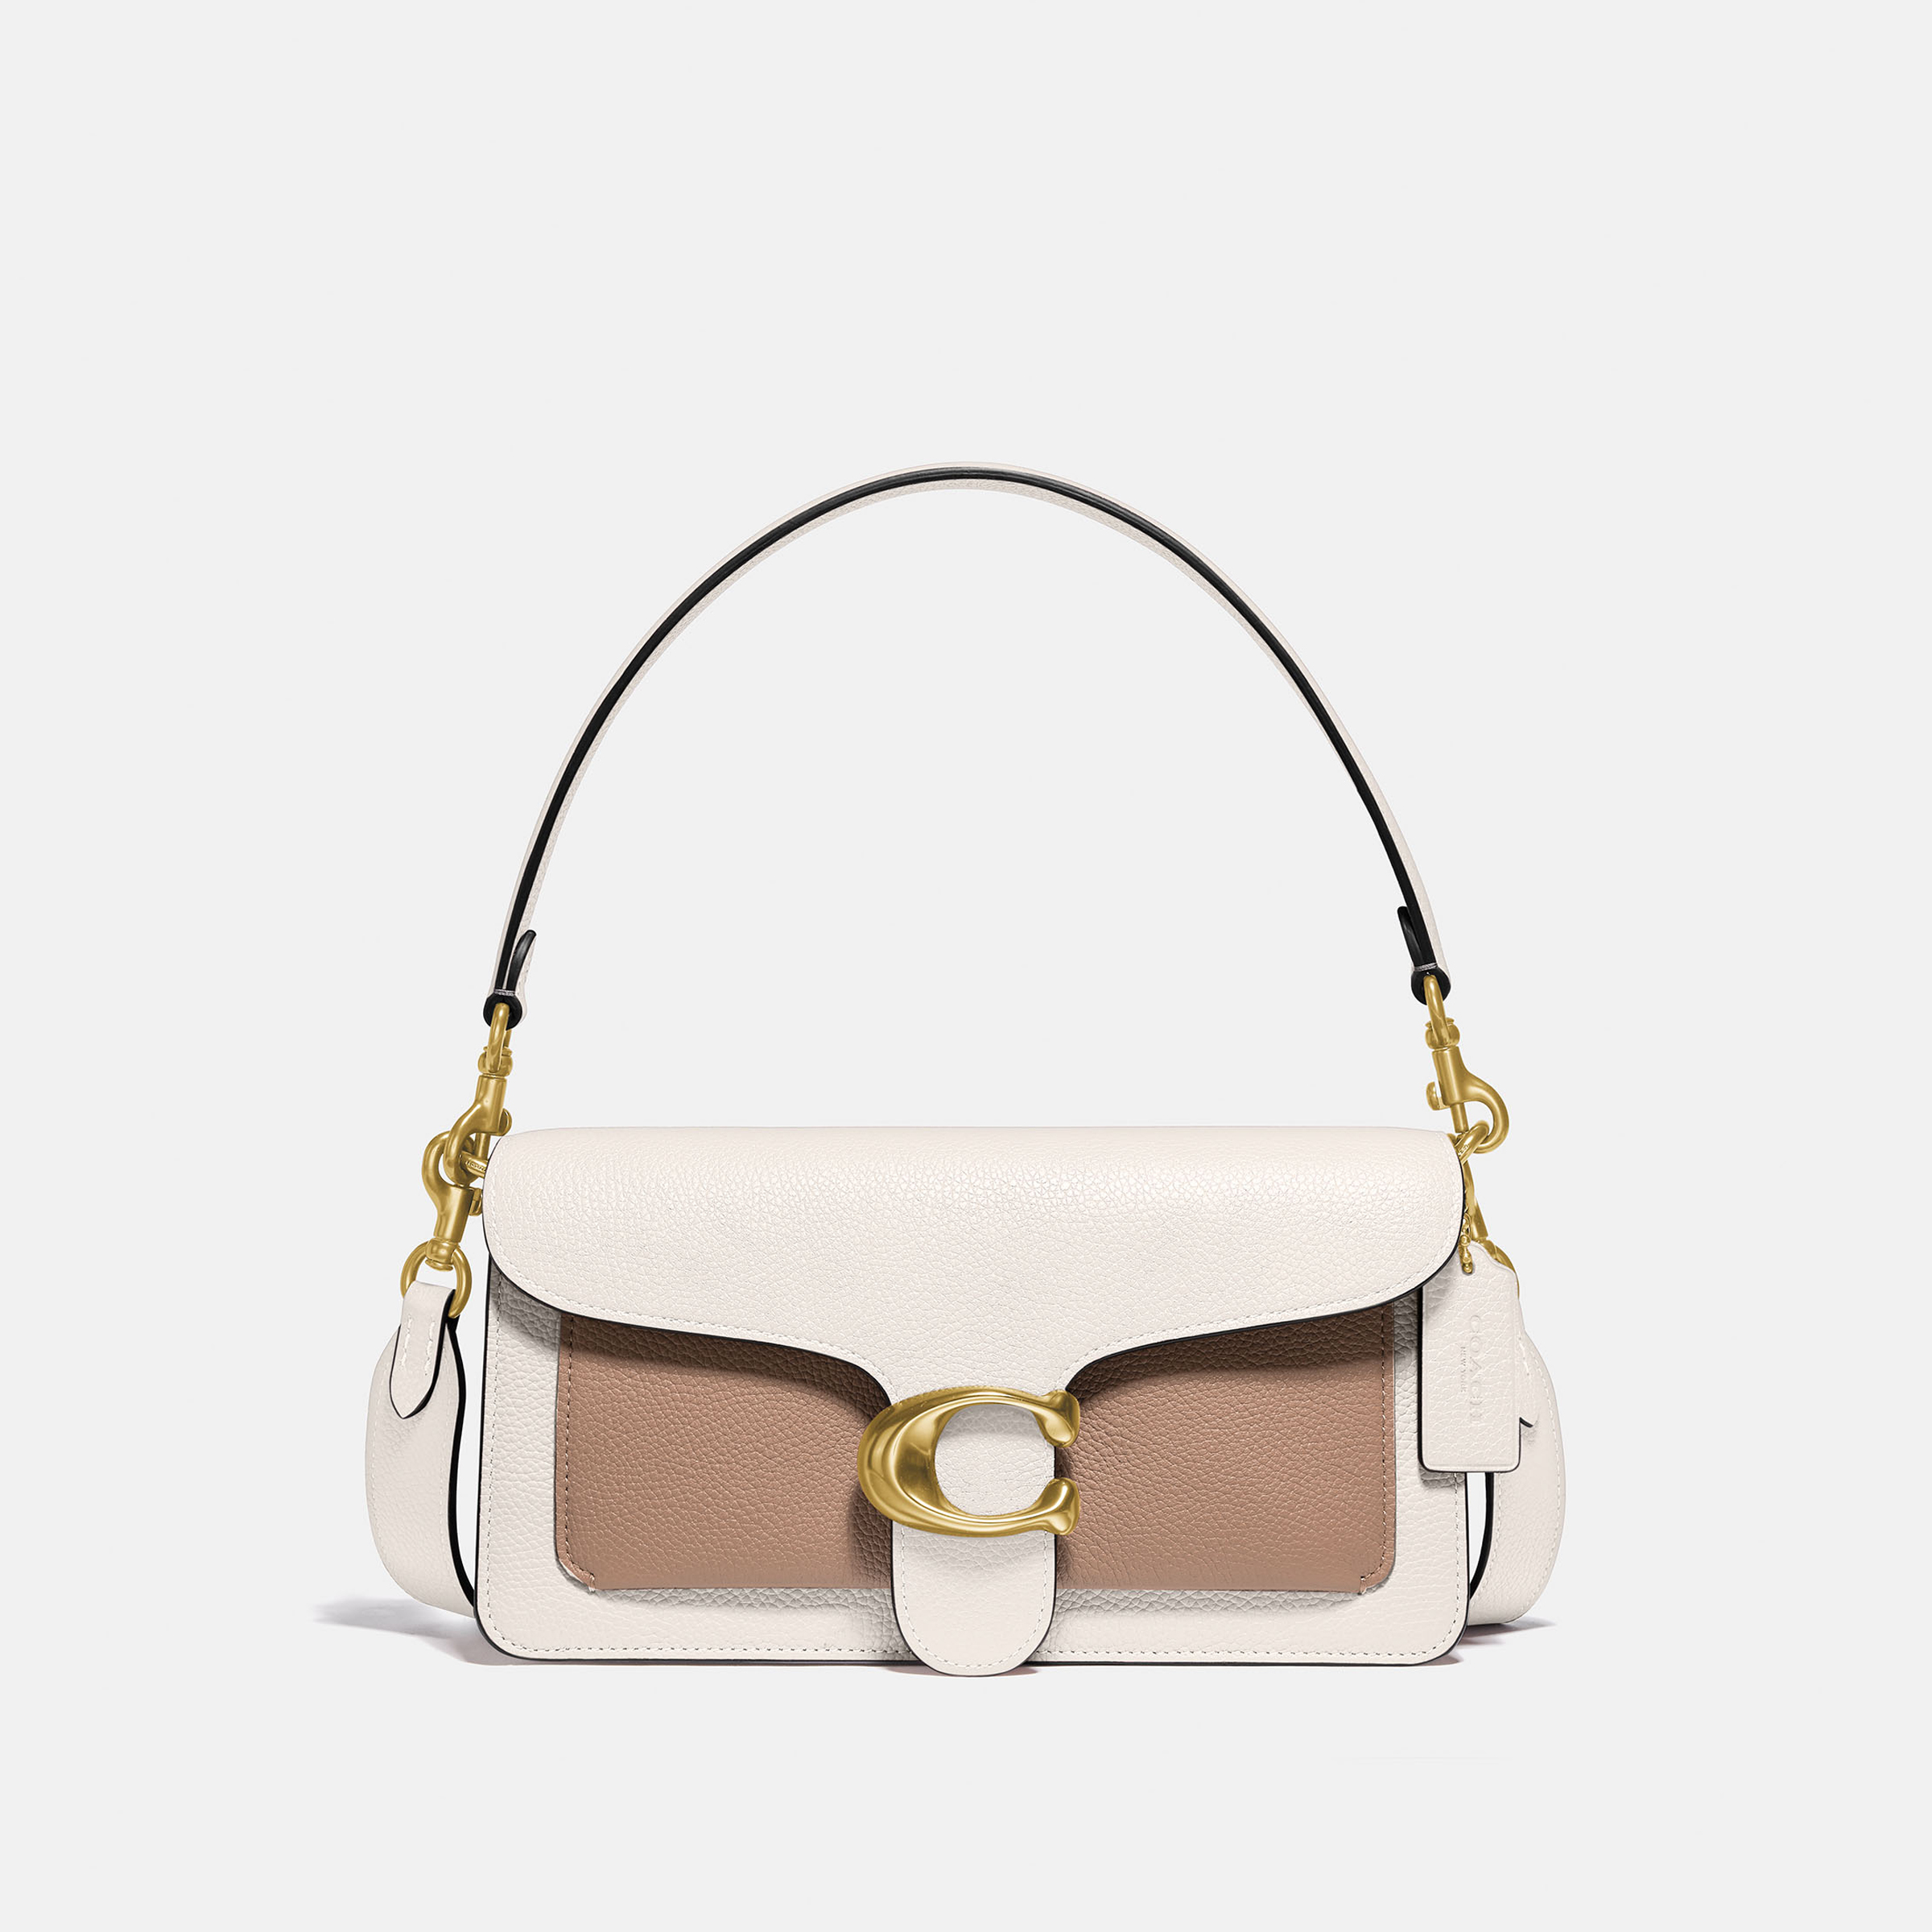 Coach TABBY SHOULDER BAG TAUPE • Voisins Department Store